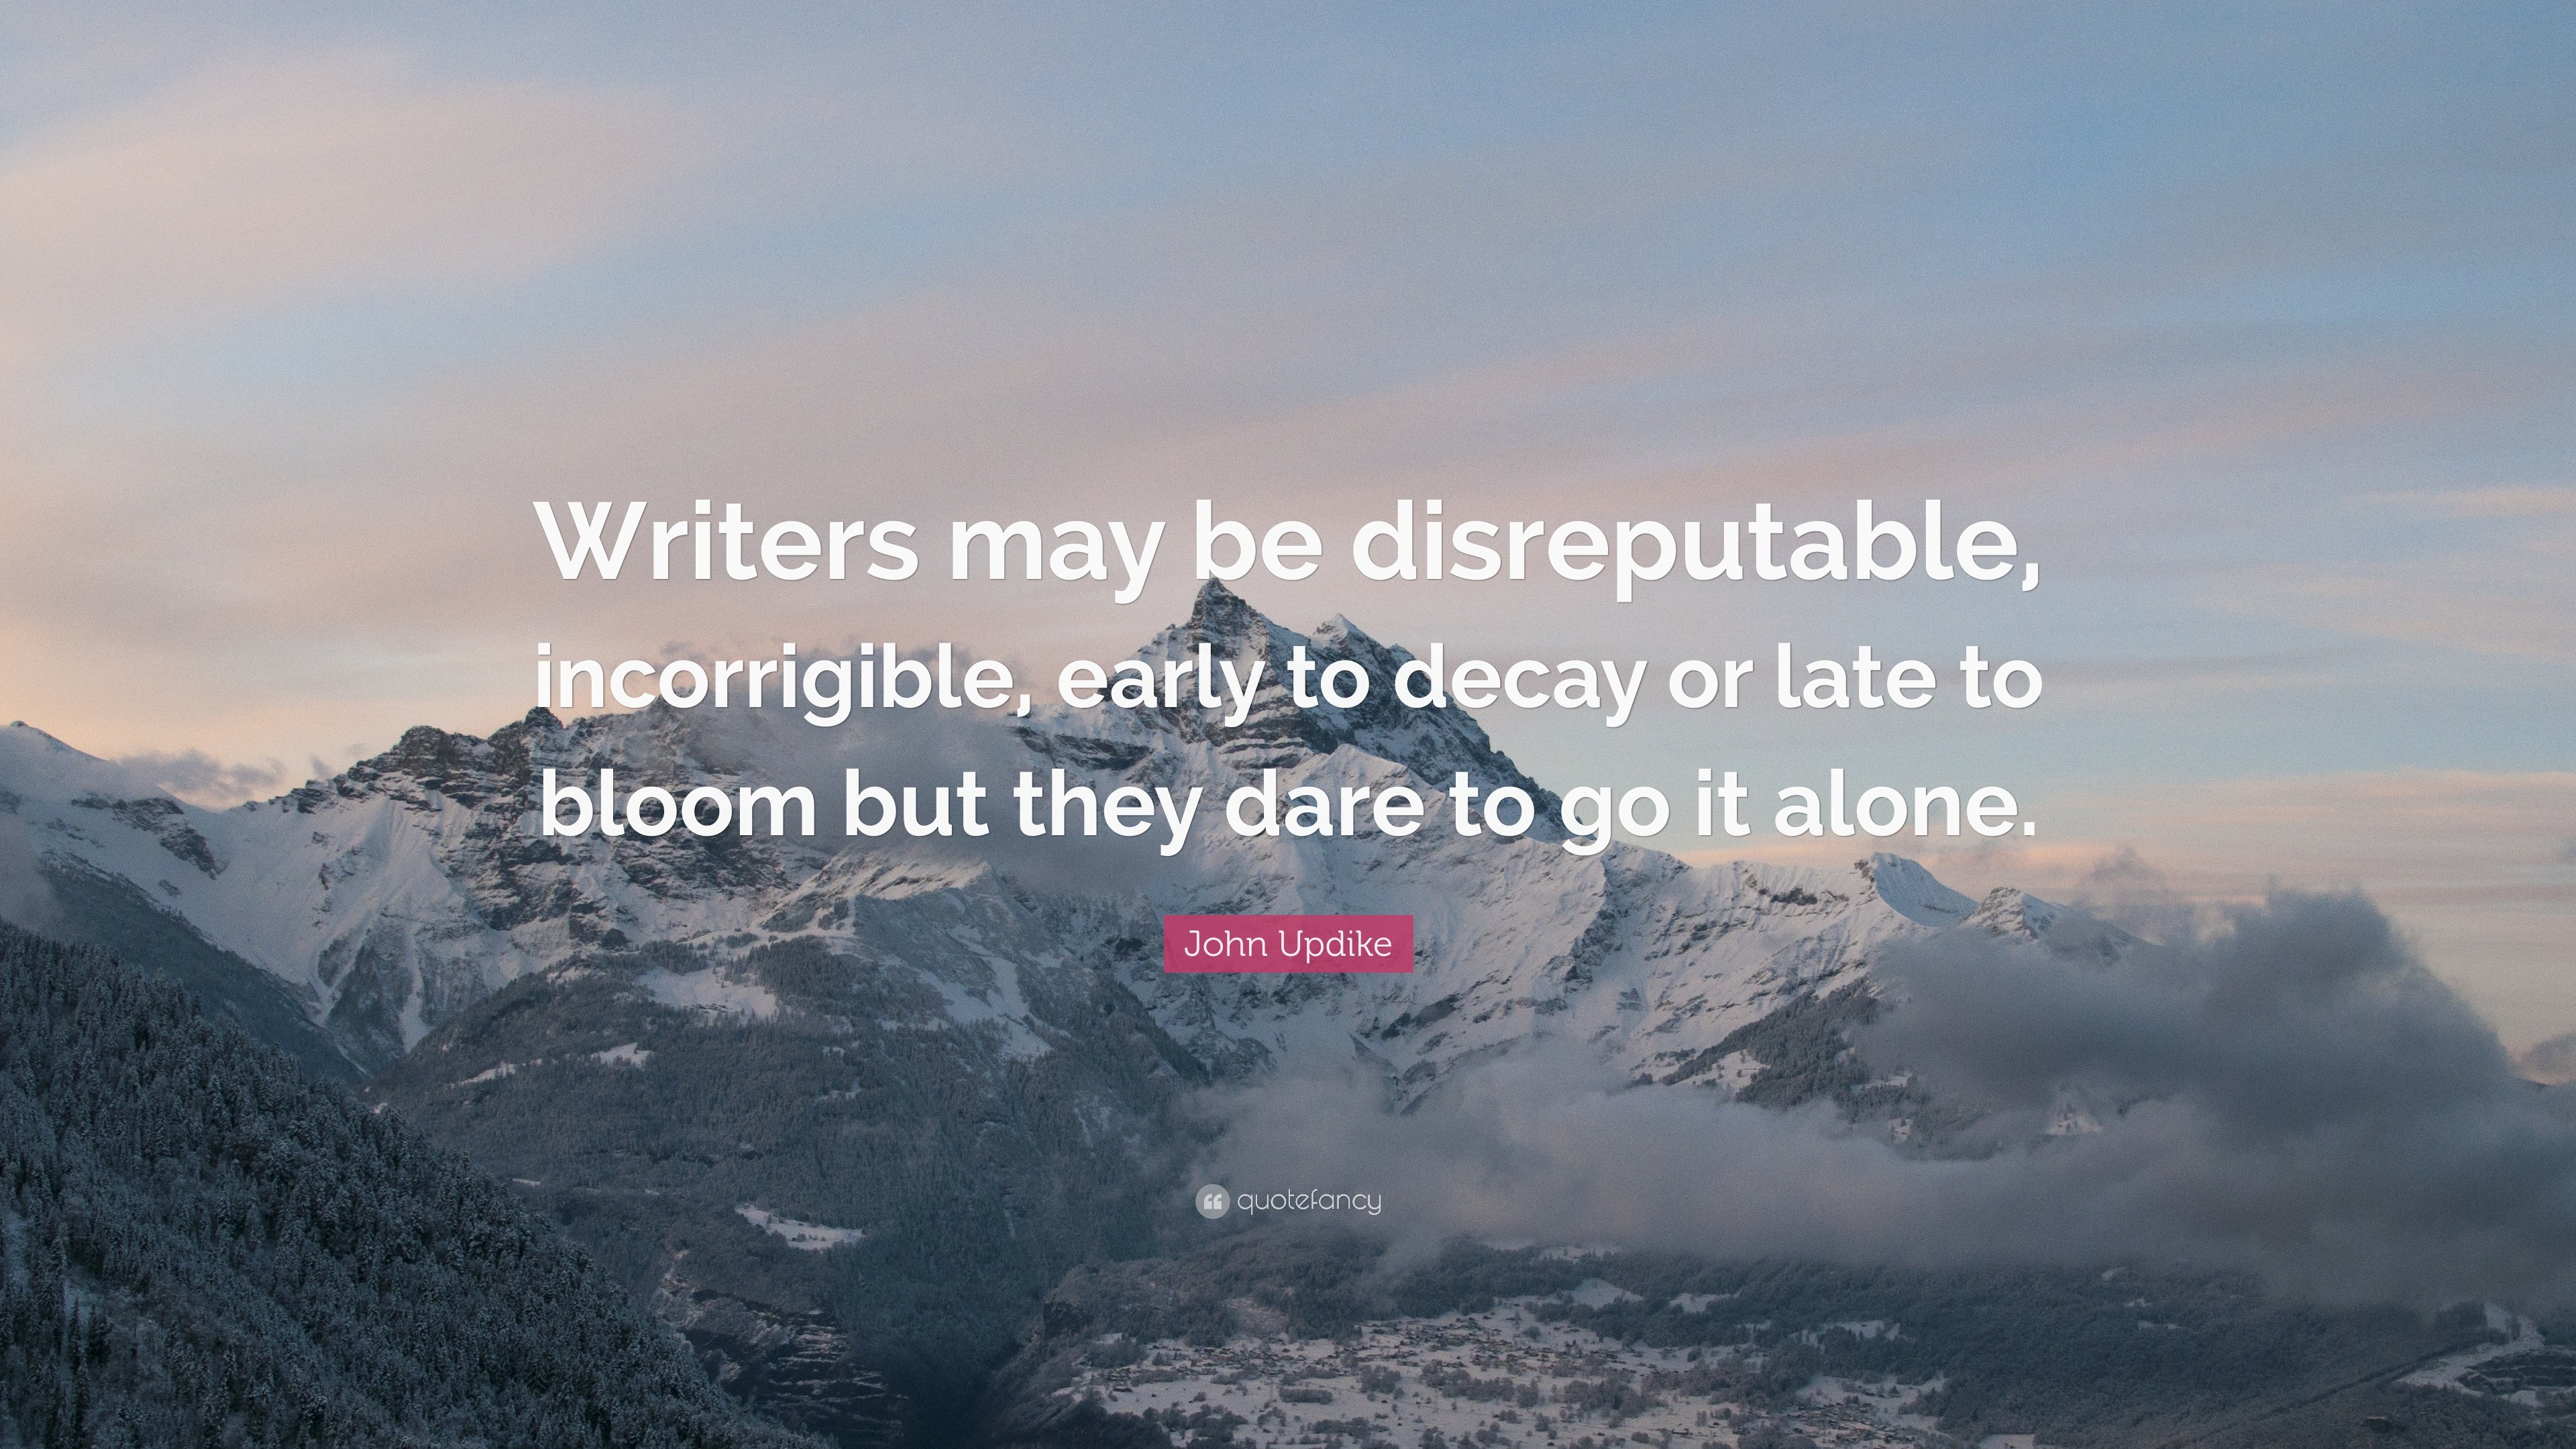 John Updike Quote: “Writers may be disreputable, incorrigible, early to ...